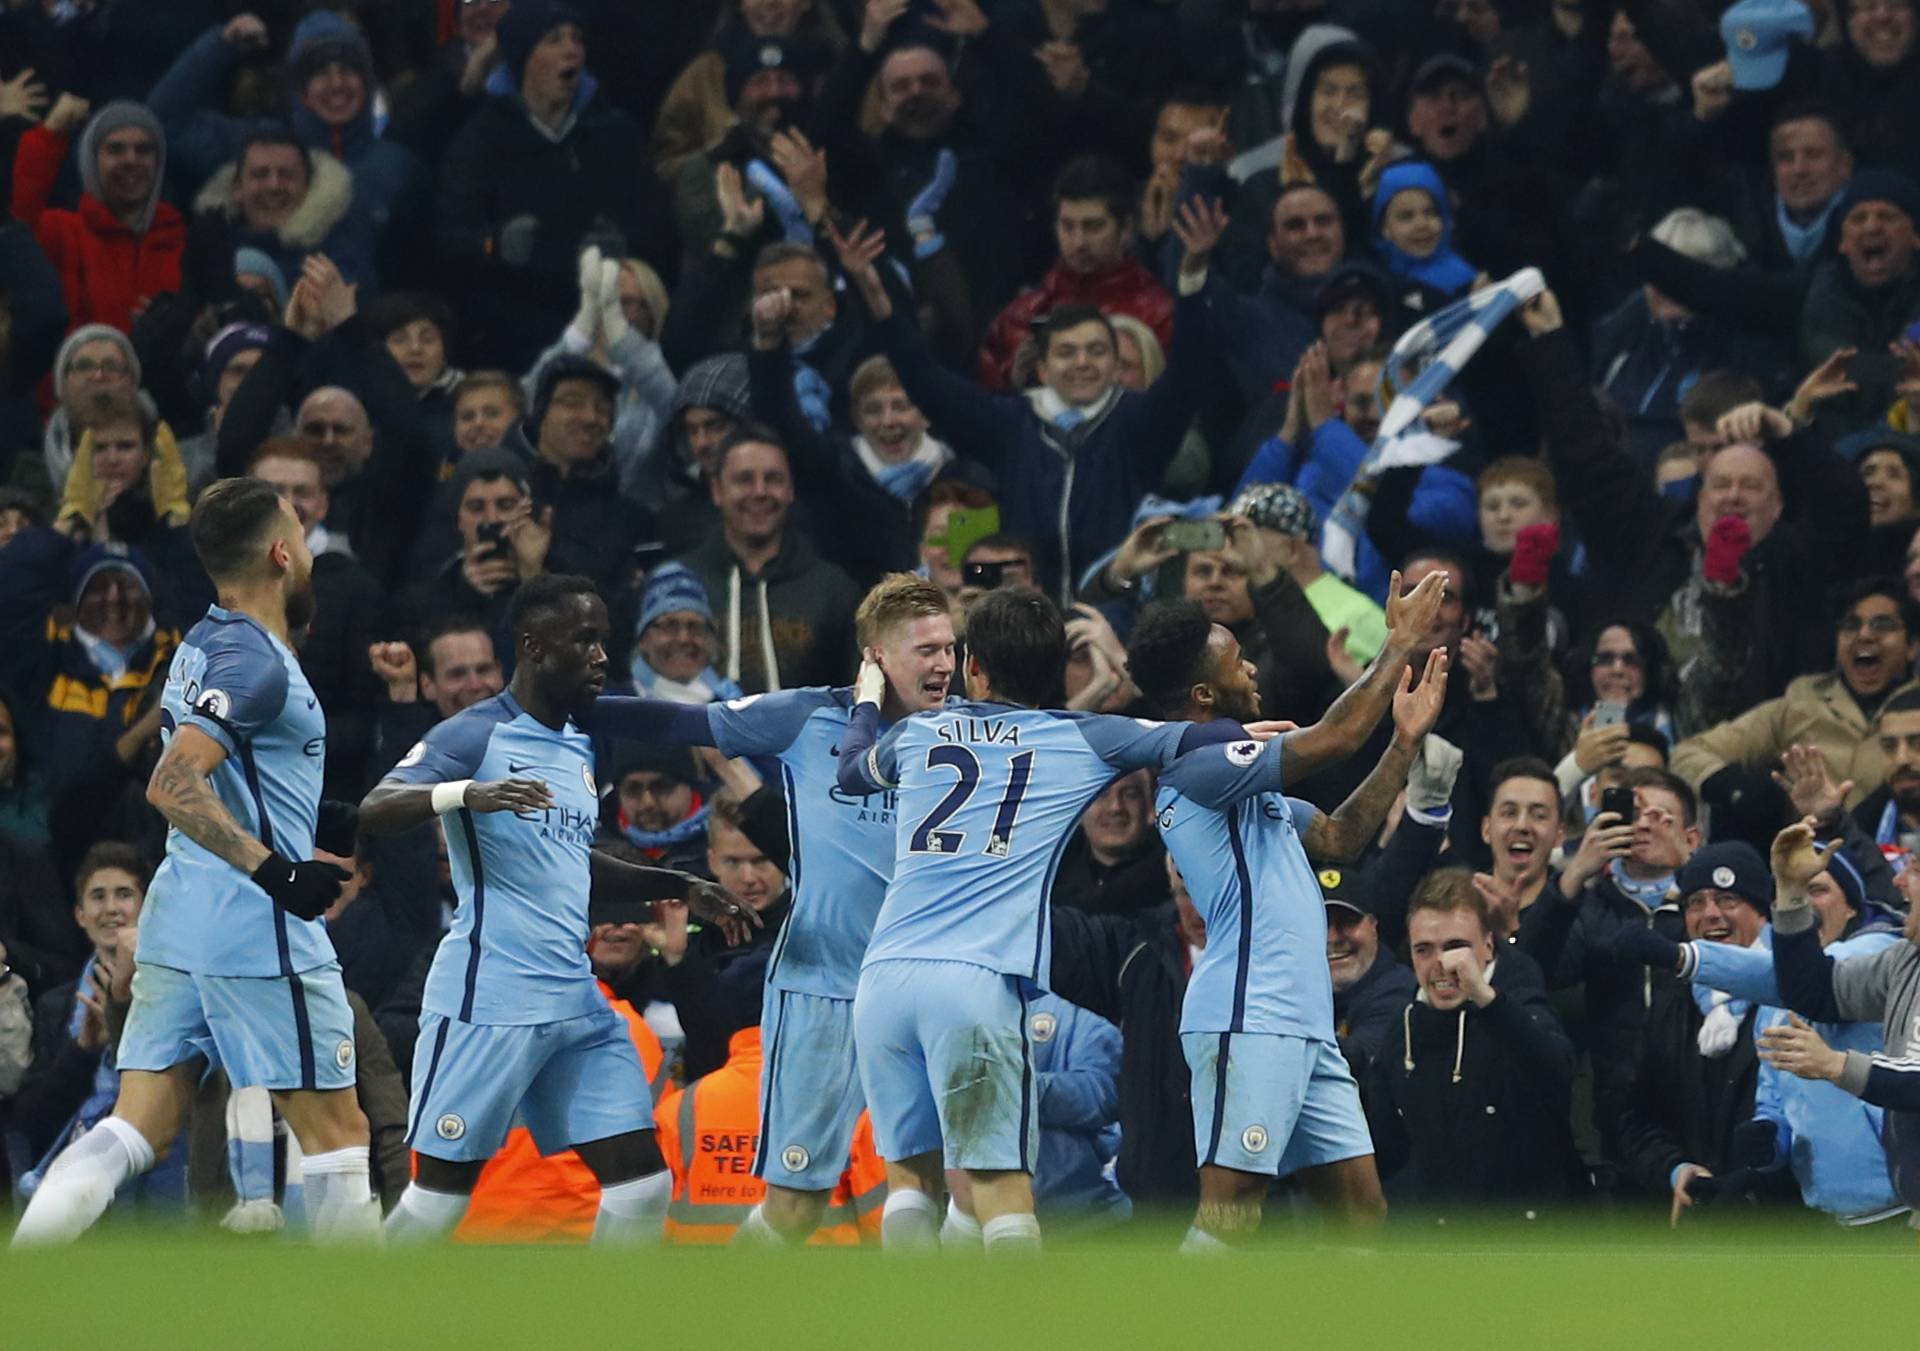 Manchester City's Raheem Sterling celebrates scoring their second goal with team mates